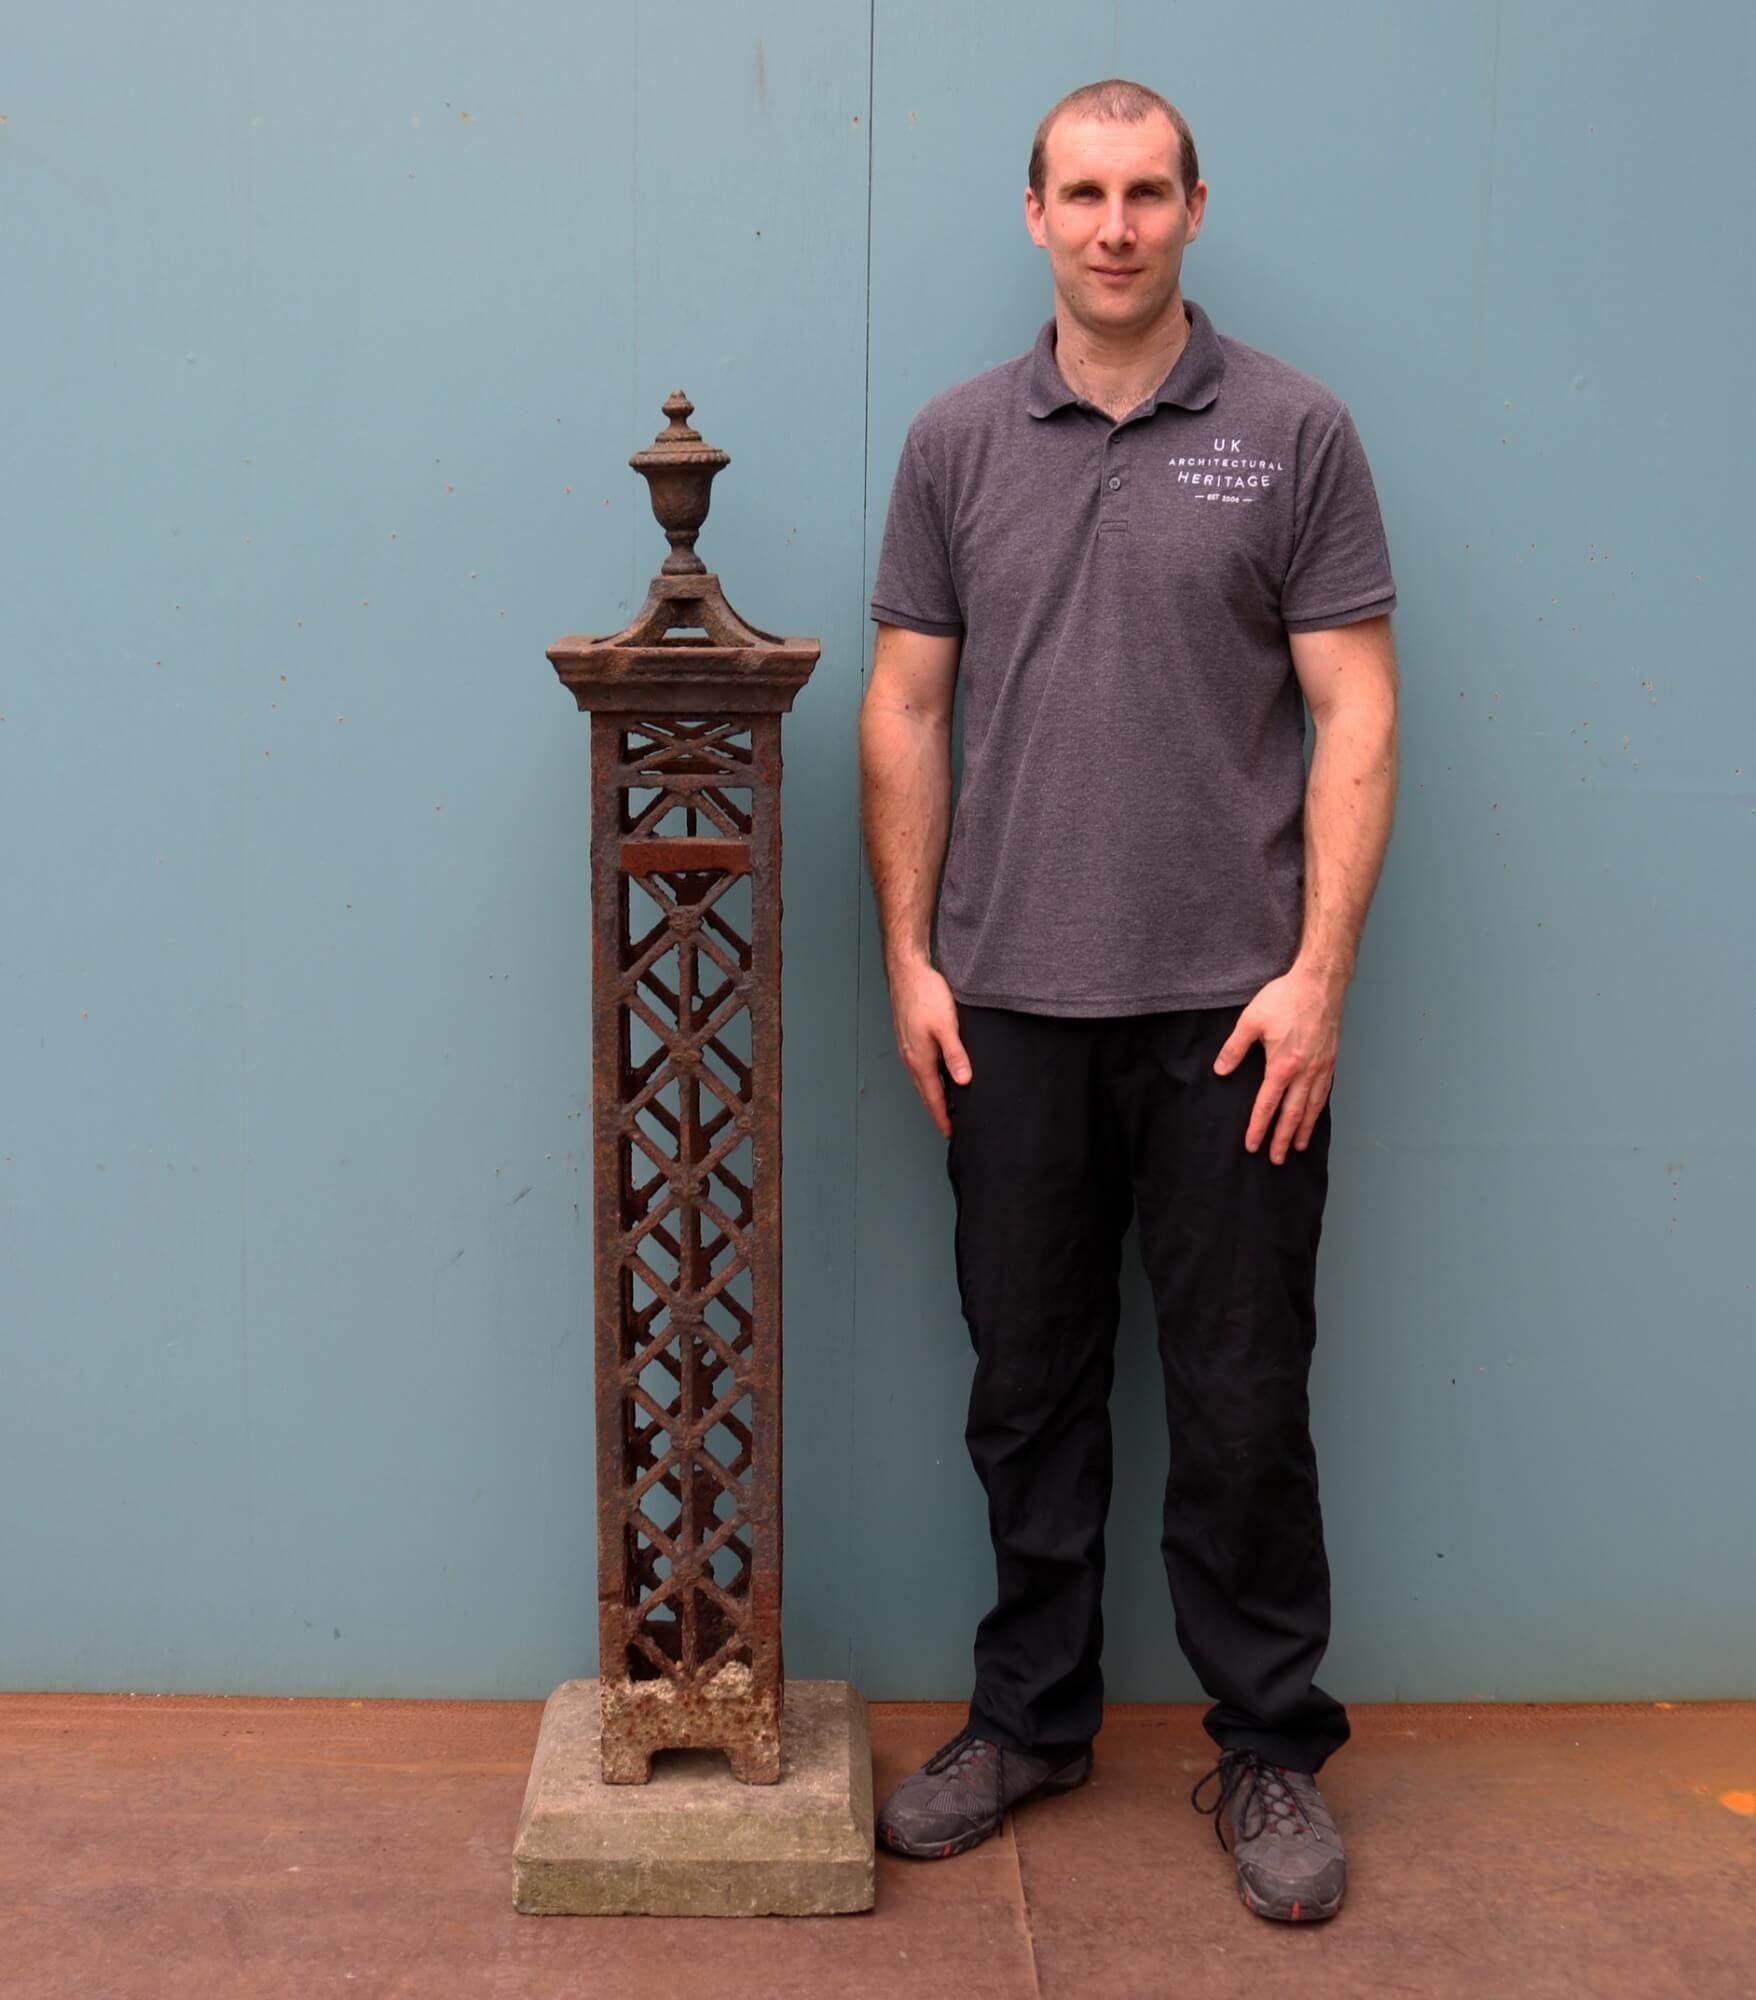 A decorative metal obelisk for a garden or courtyard. Cast in iron at the beginning of the 19th century, this garden obelisk has stood the test of time for more than 200 years. It has a weathered appearance that can only be created by years of